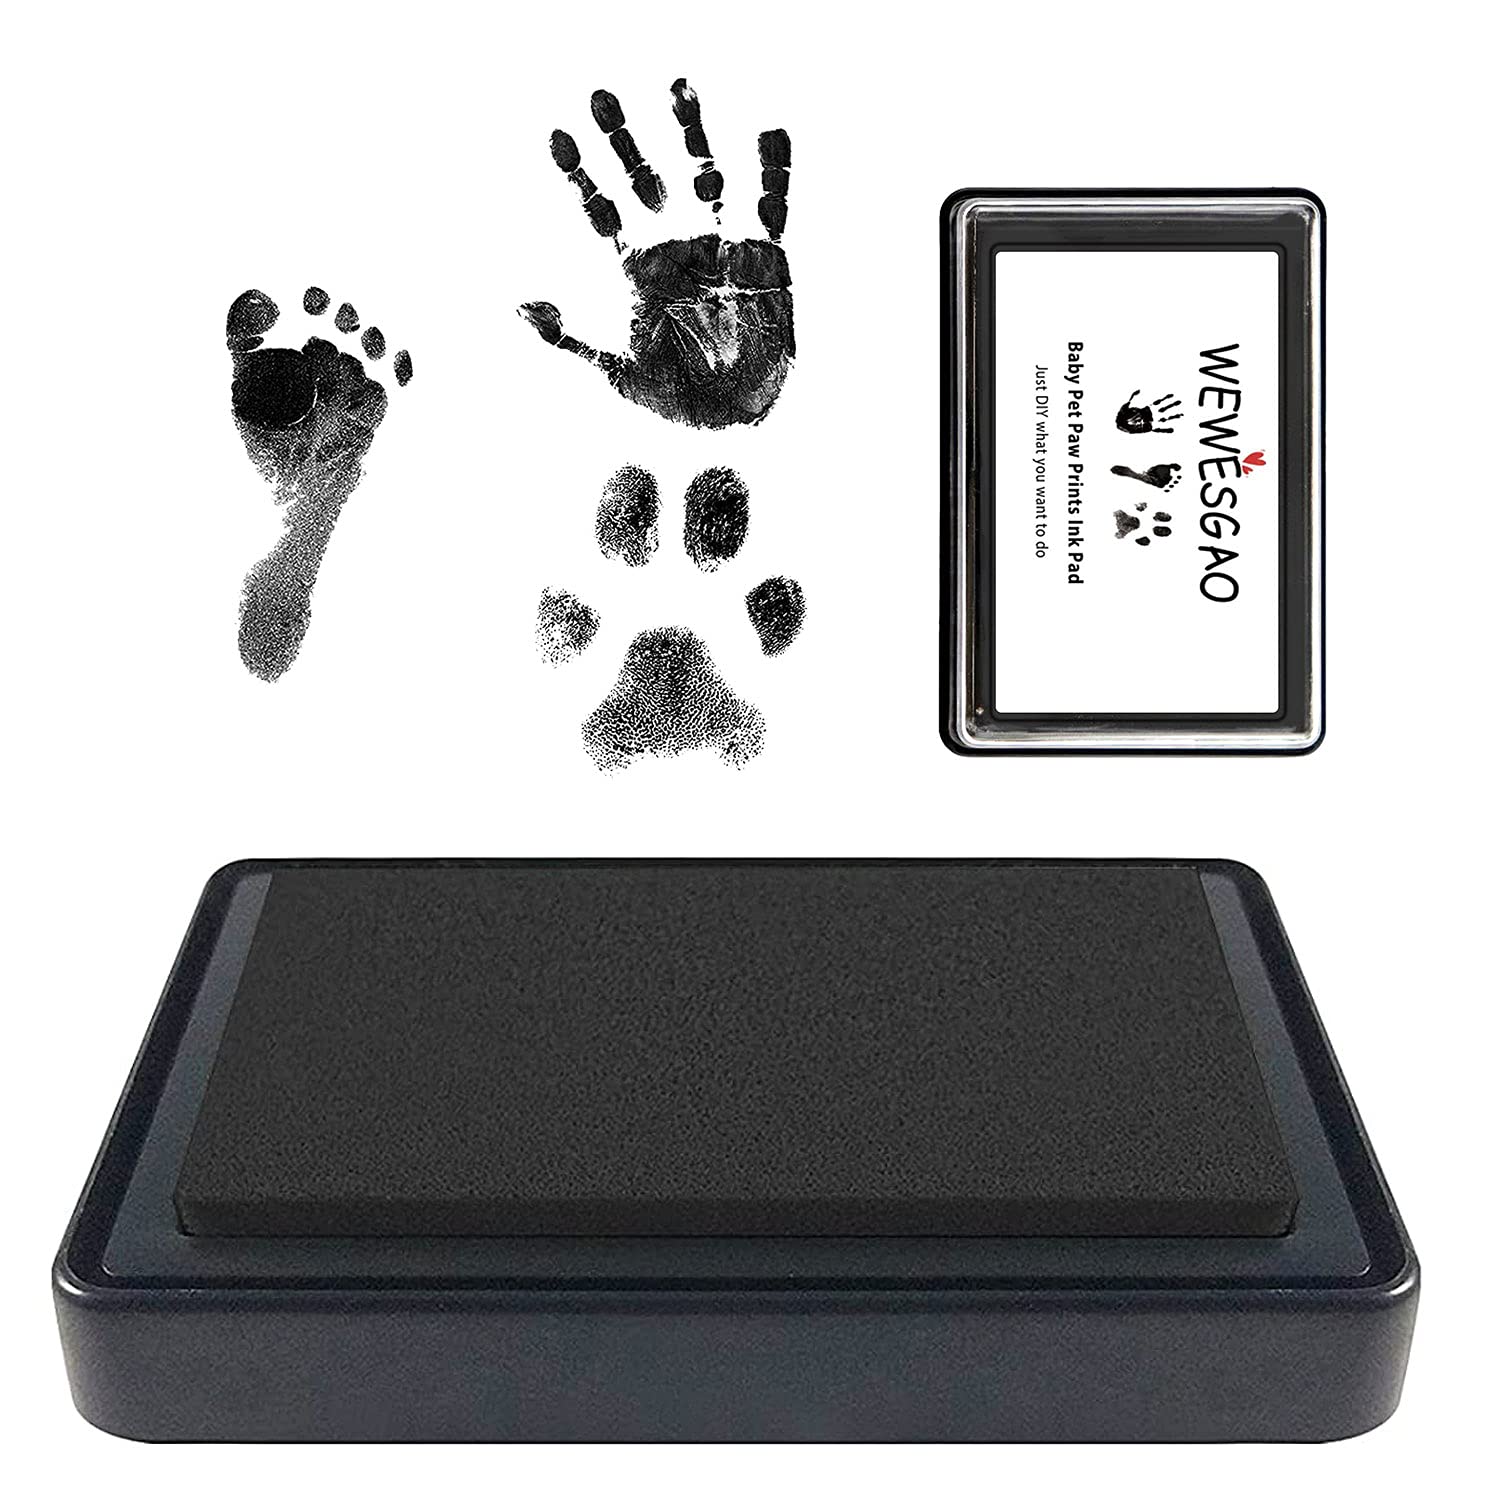 WEWESgAO Ink Pads for Baby Footprints and Pet Paw Print kit,Non-Toxic and Acid-Free Ink, Easy to Wipe and Wash Off Skin, Smudge